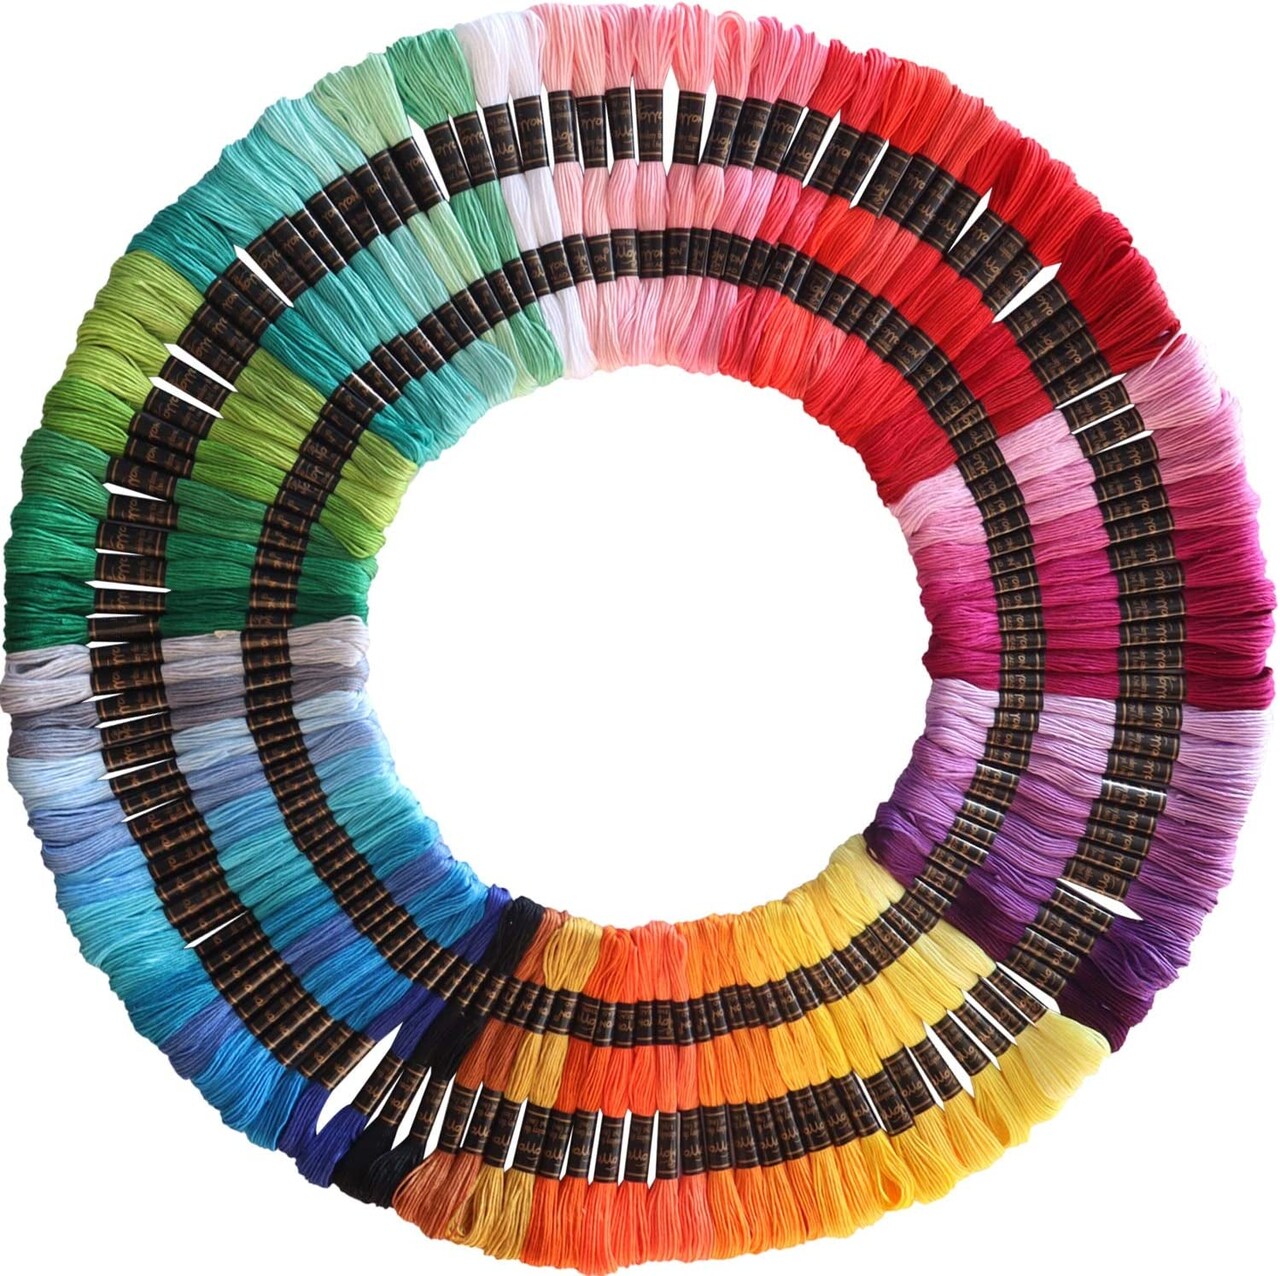 122 Skeins Embroidery Floss - Embroidery Thread - Friendship